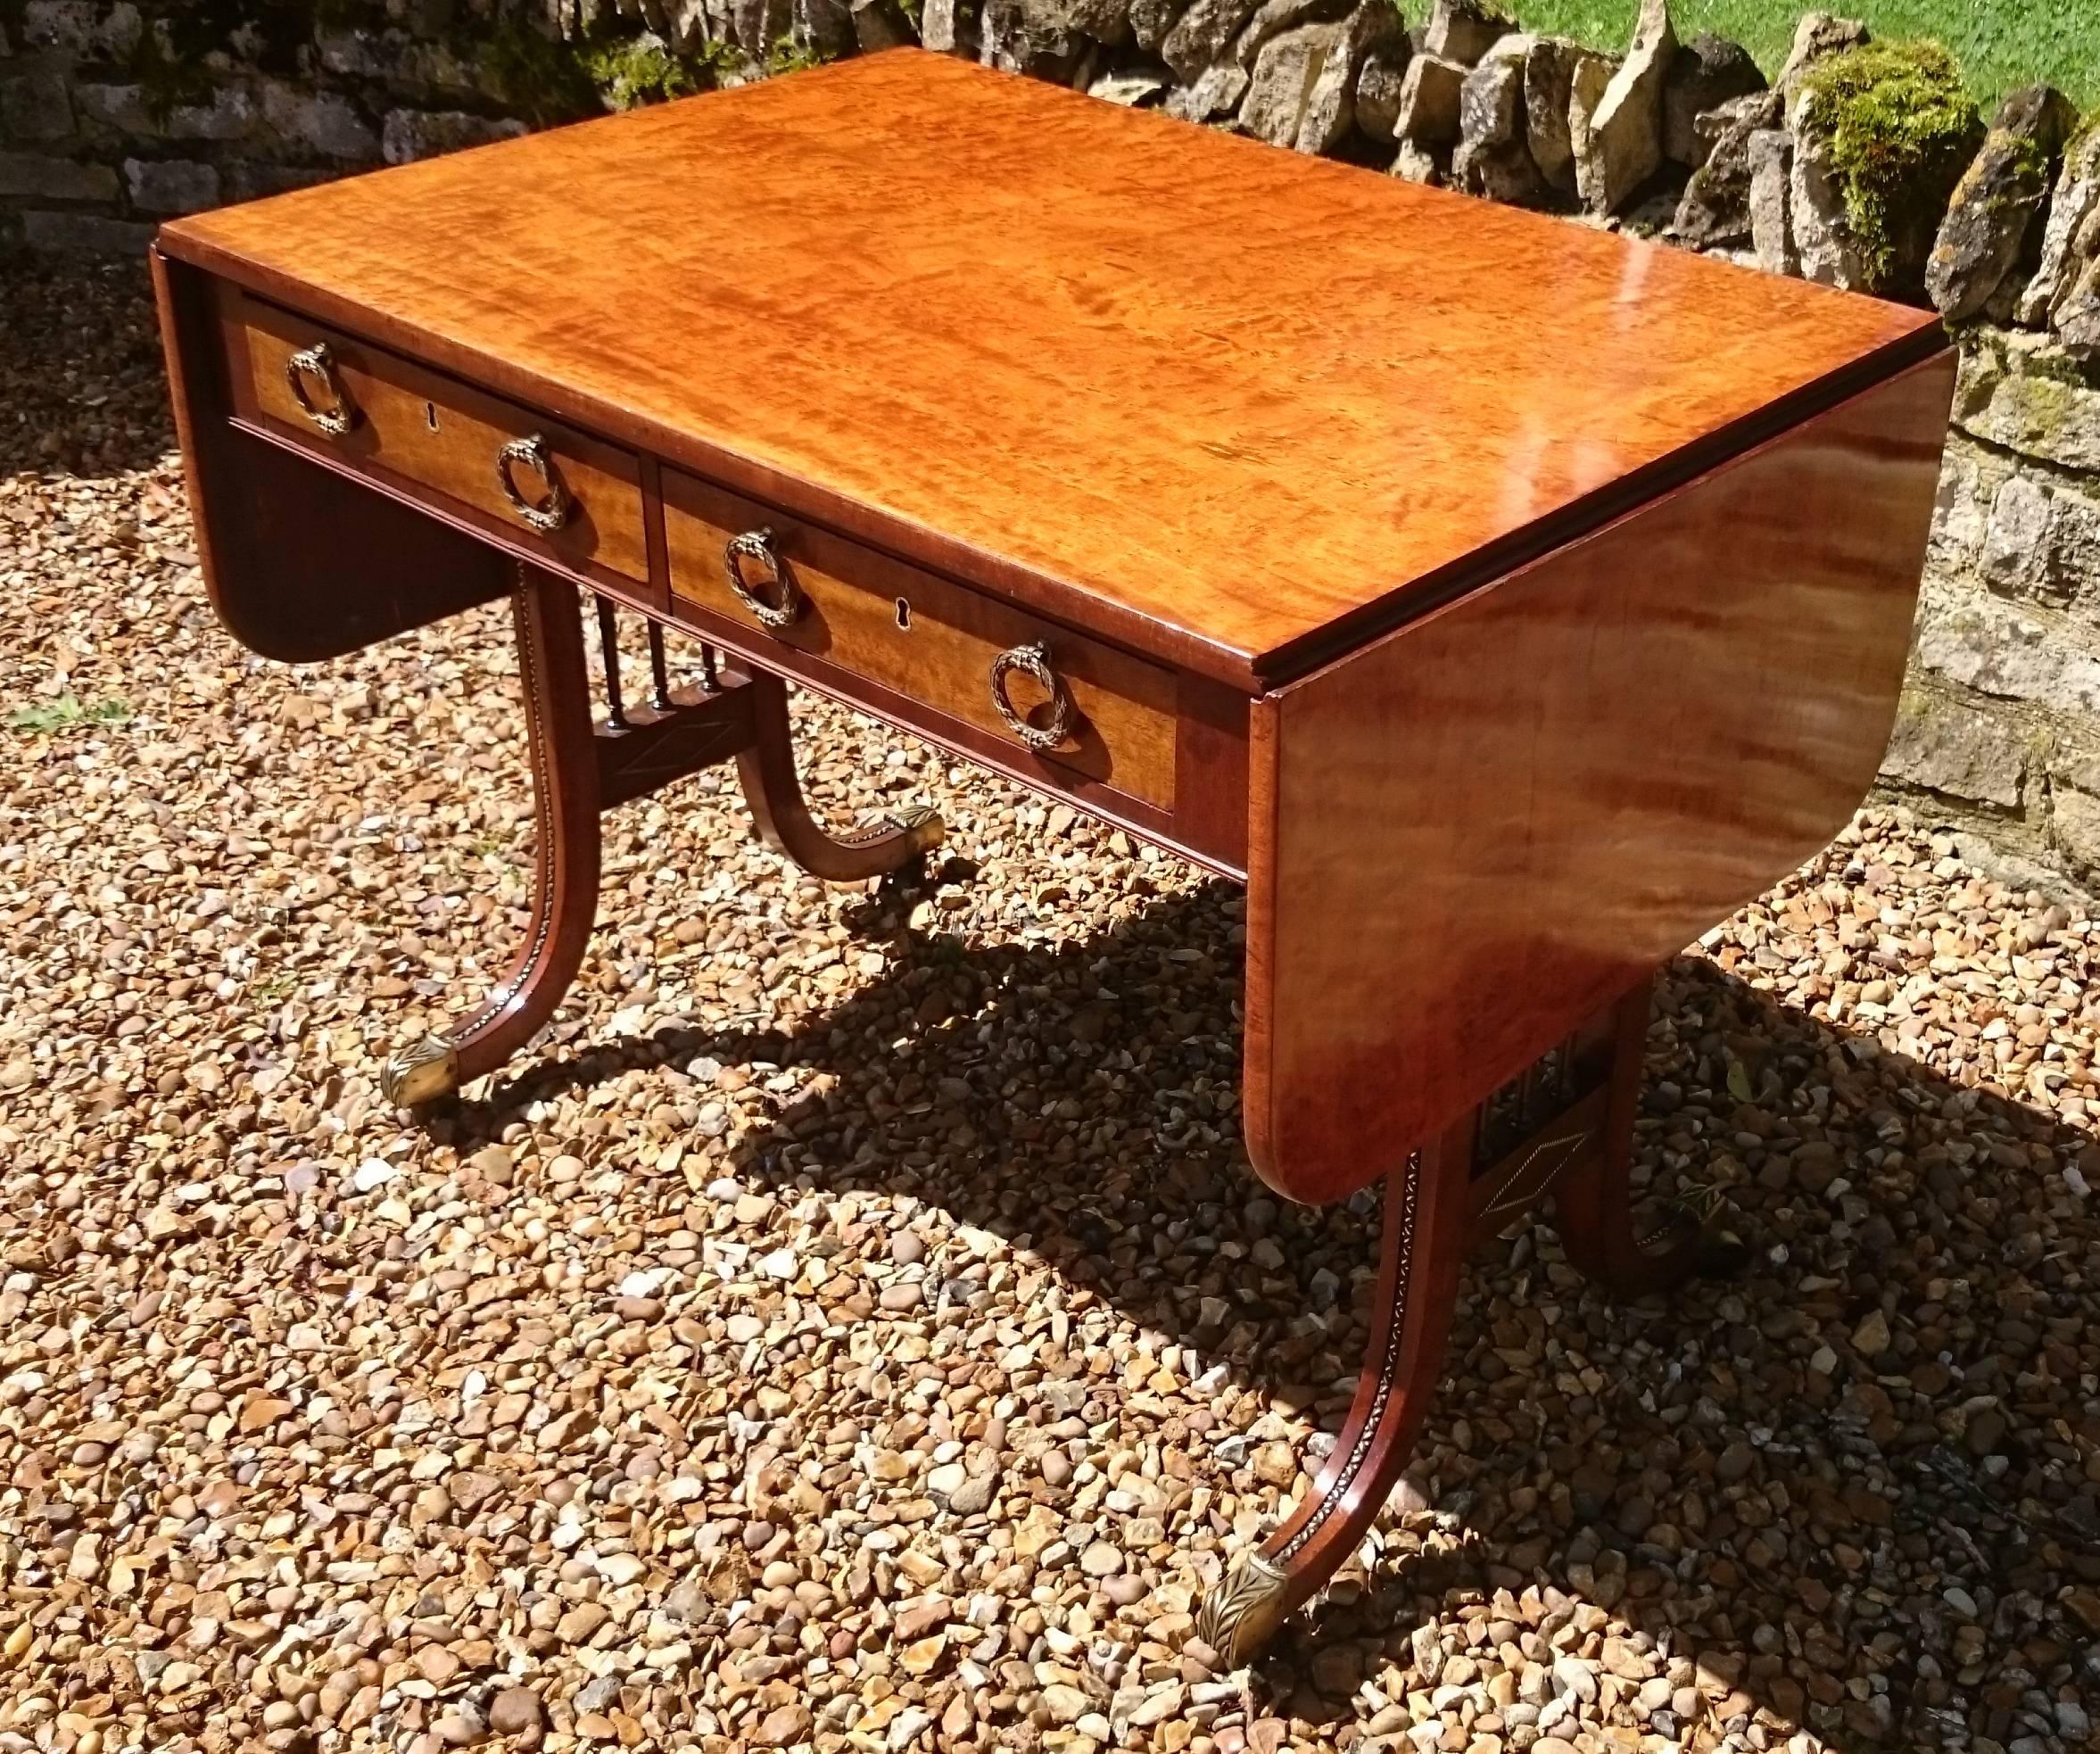 Great Britain (UK) Very Fine Quality Early 19th Century Regency Mahogany Antique Sofa Table For Sale